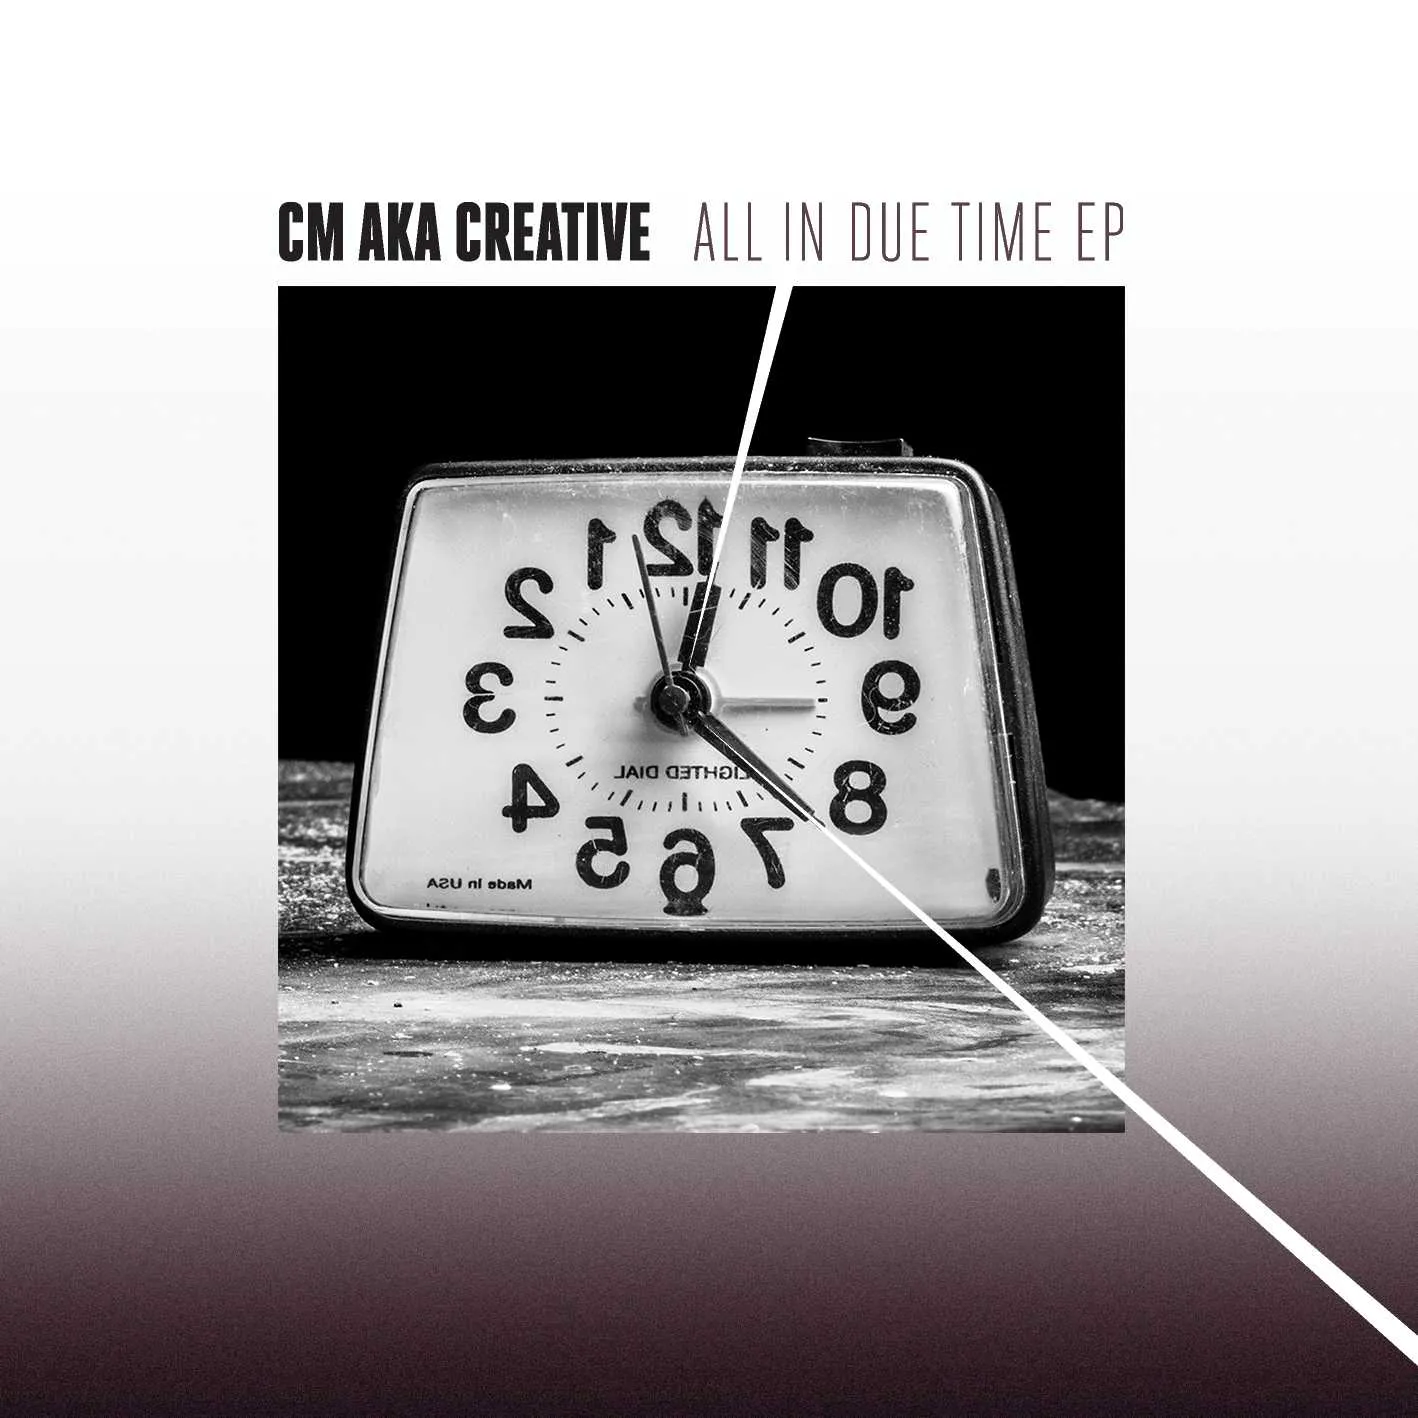 Album cover for “All In Due Time EP” by CM aka Creative